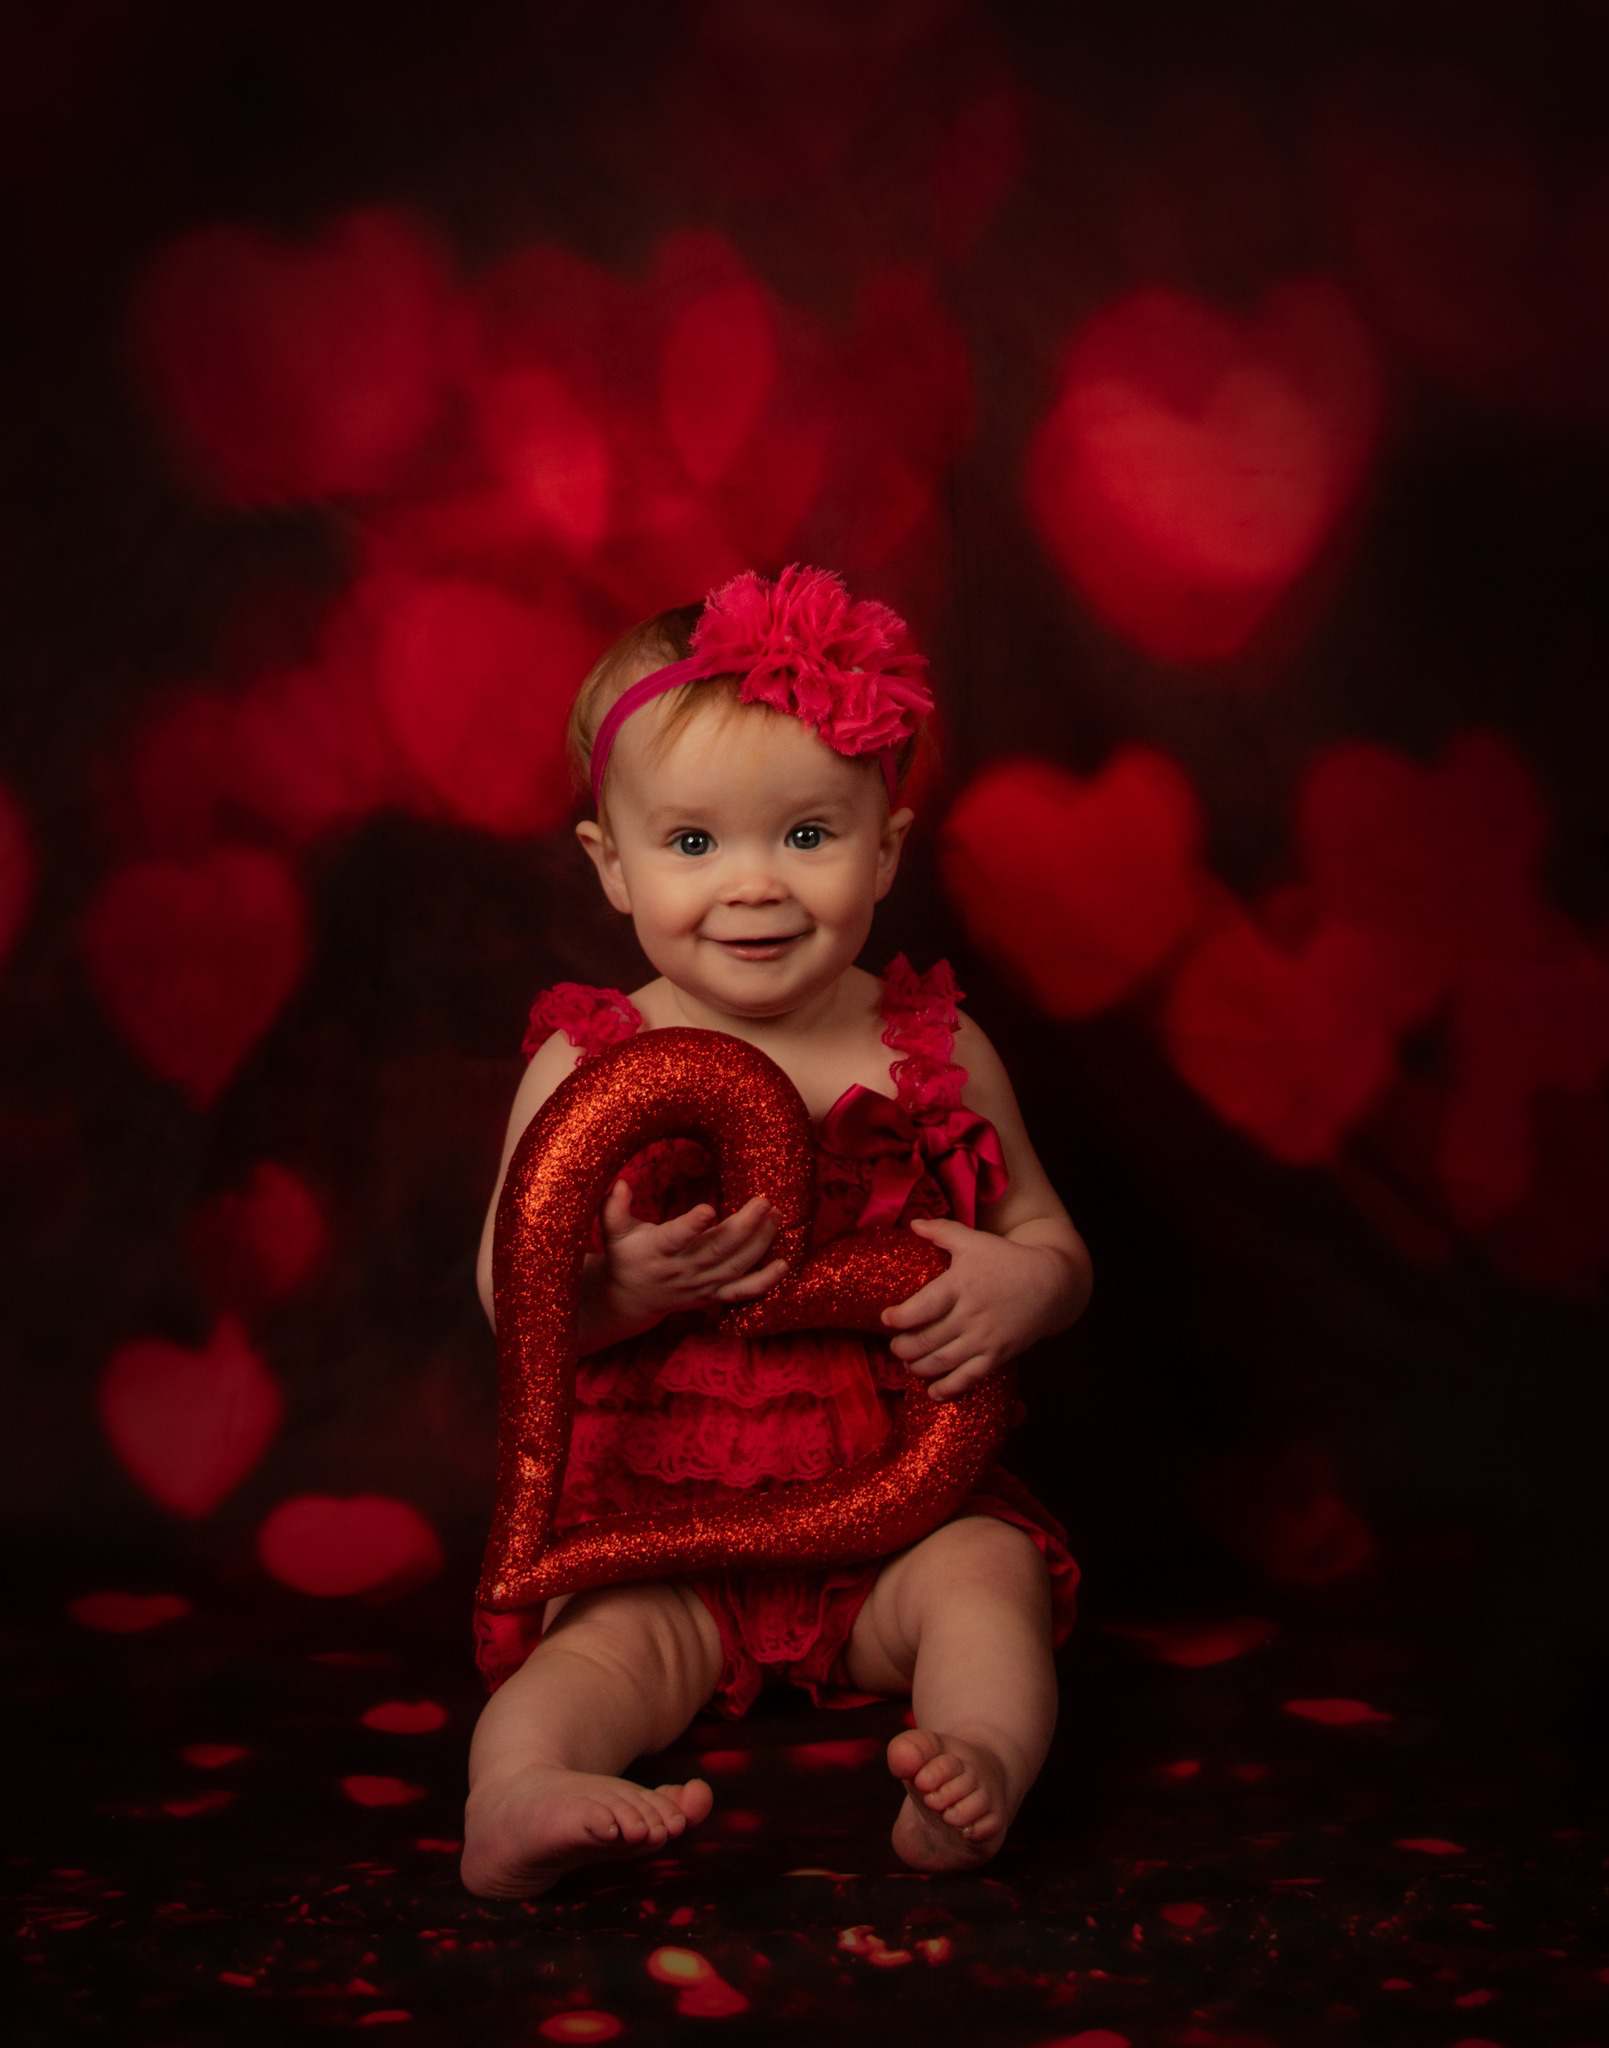 Kate Valentine's Day Backdrop Red Bokeh for Photography